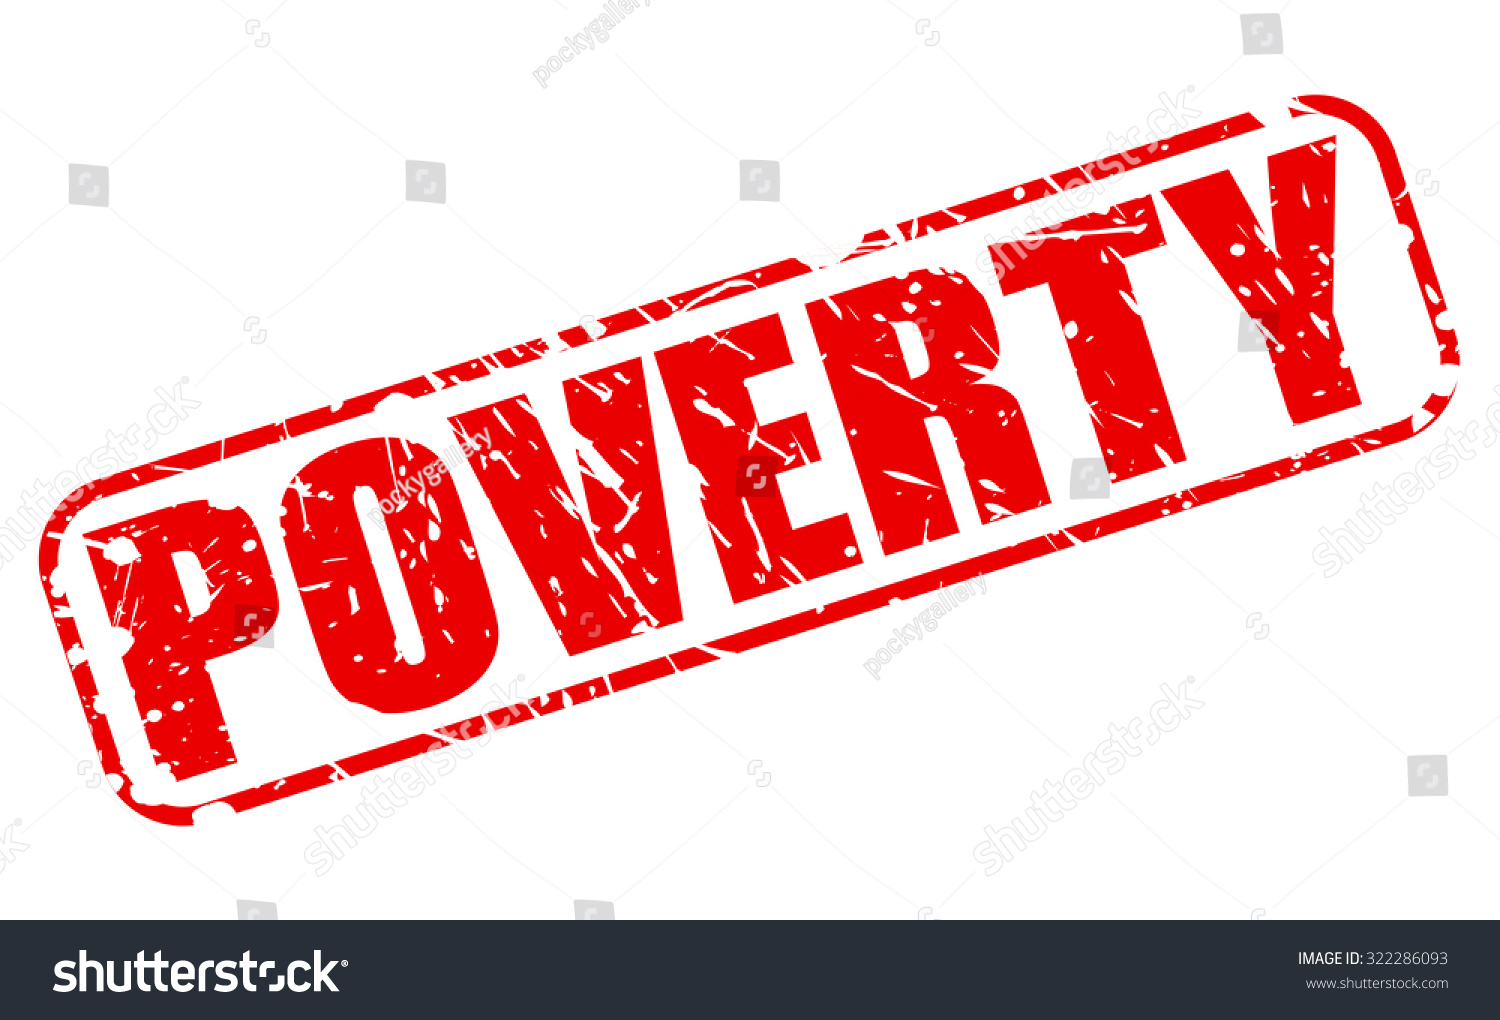 clipart on poverty - photo #18